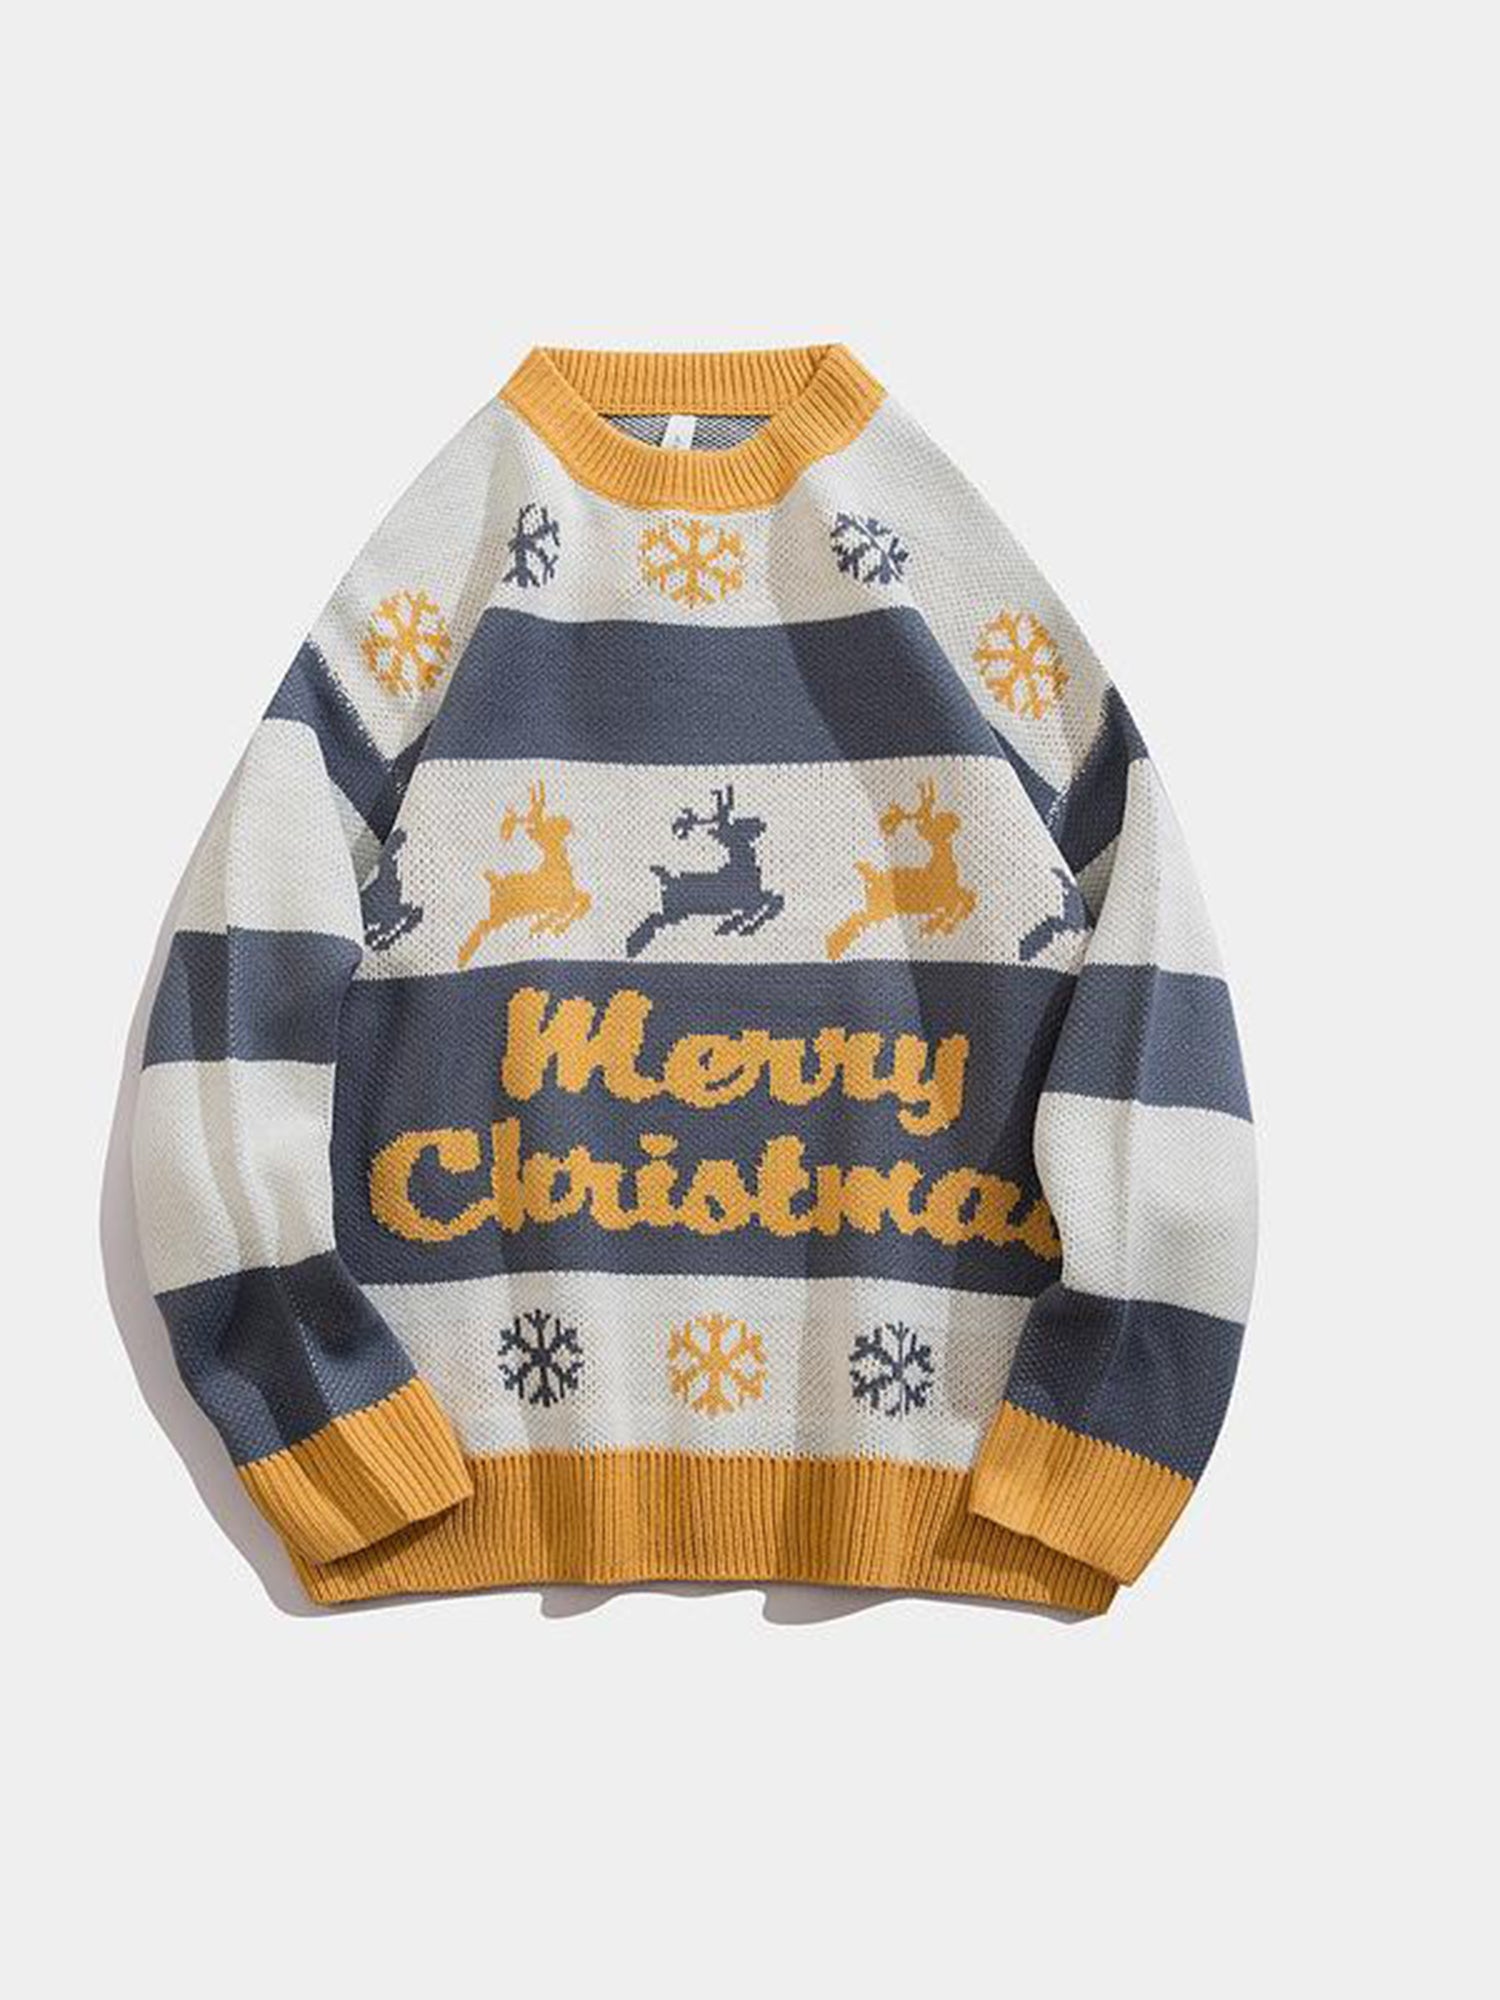 JUSTNOTAG Christmas Print Polyester Round Neck Holiday Sweater